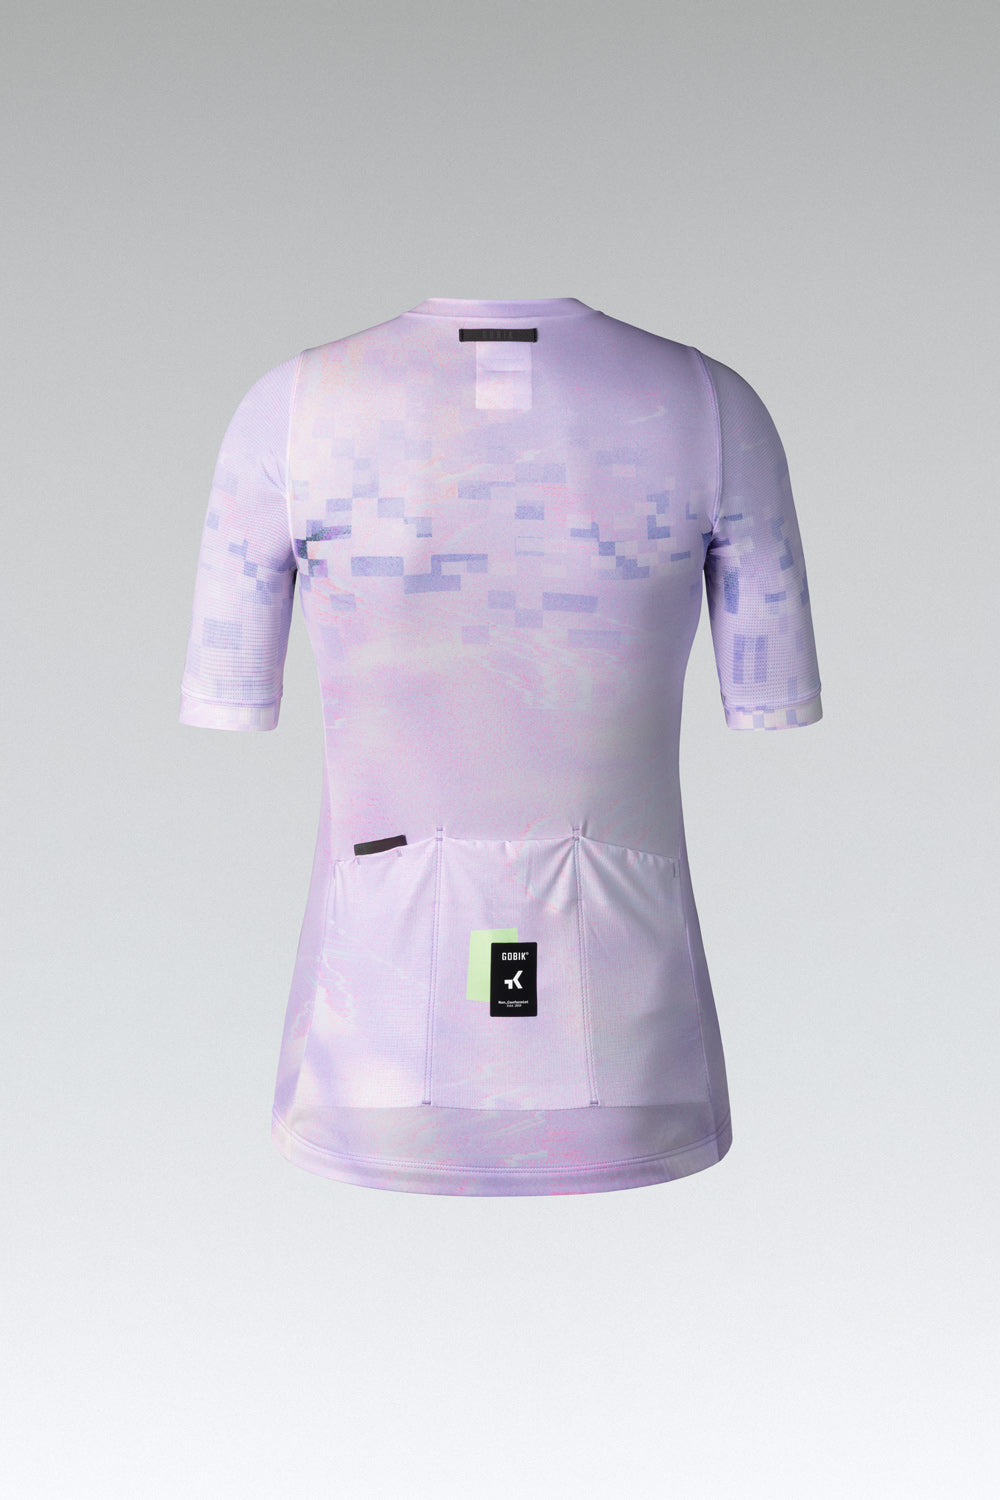 MAILLOT MANCHES COURTES STARK FEMME LILAC